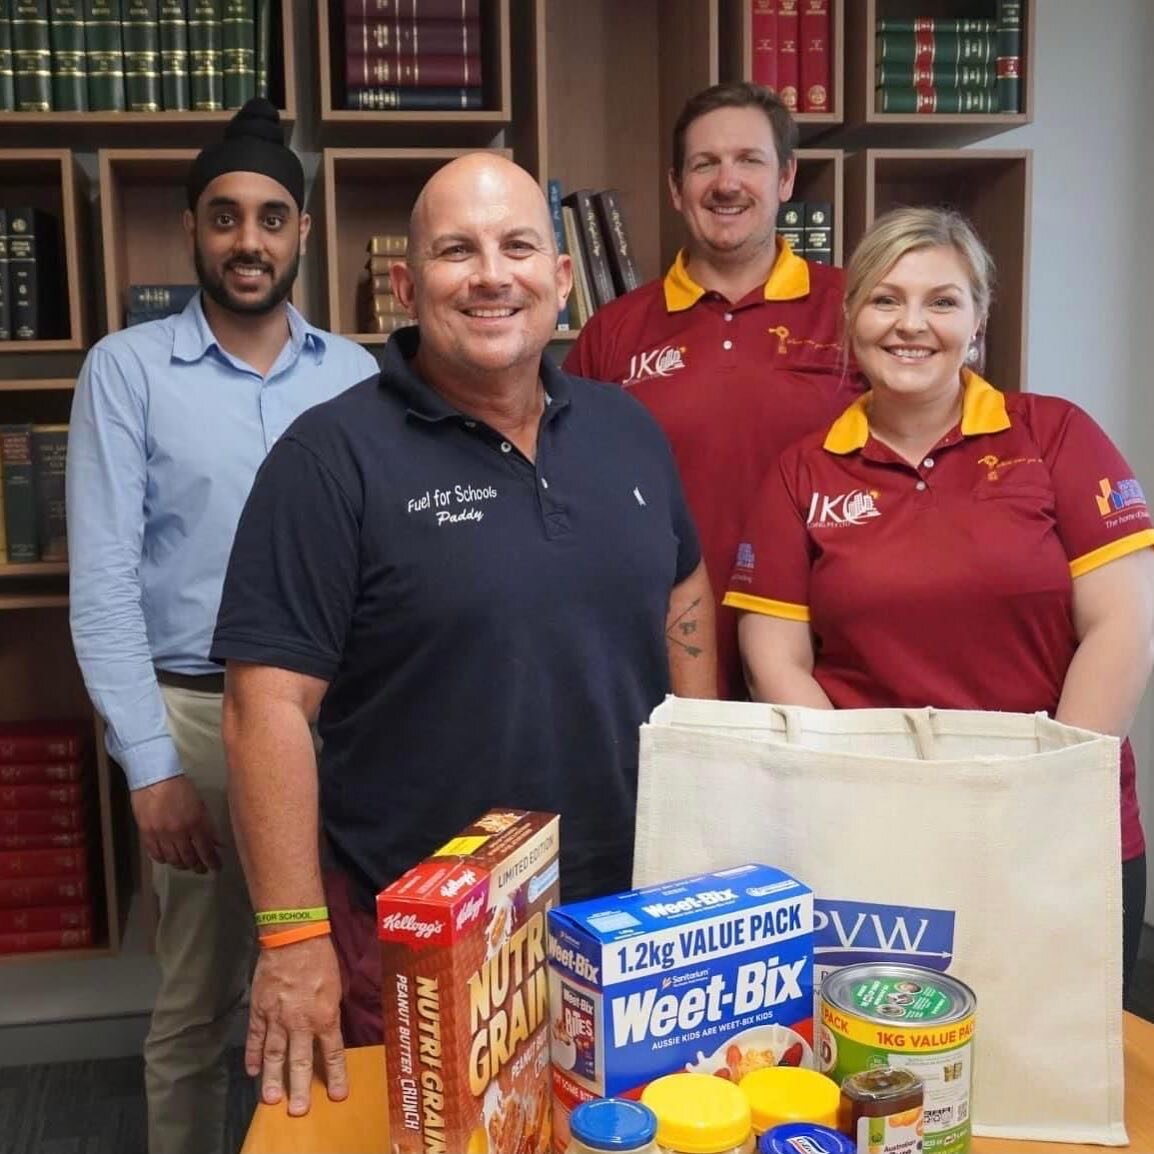 So great to meet Patrick &amp; Reiannan Kenna from JKC Building who presented Fuel For Schools with some donations this afternoon at PVW Partners office. 

Thank you to Mandeep and Fiona Montgomery for organising us to meet this wonderful local coupl